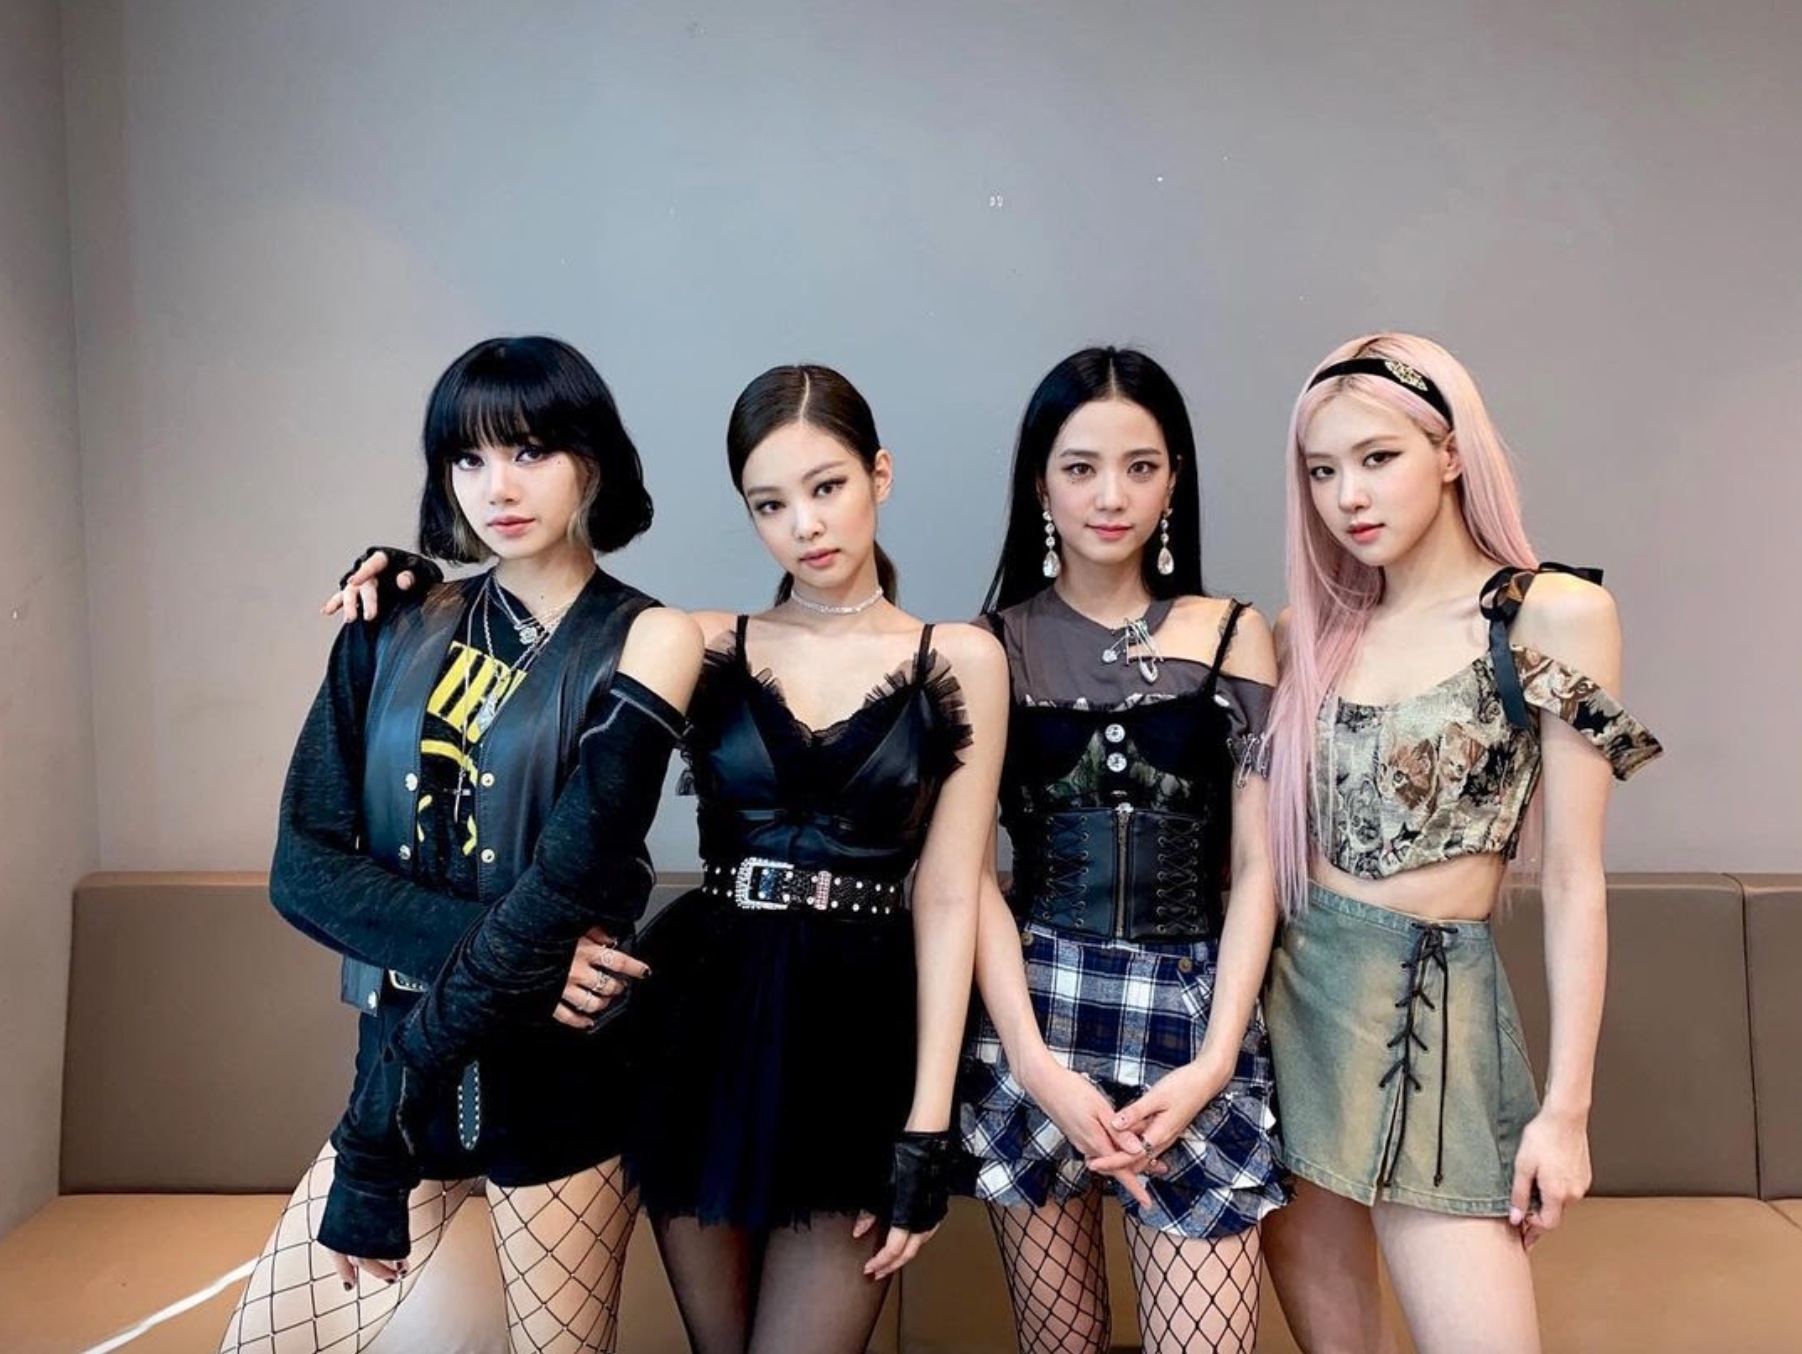 BLACKPINK will be coming to an arena near you and bringing new music with them. On August 10, the popular K-pop group announced that they will release their second full-length album, BORN PINK, on September 16.